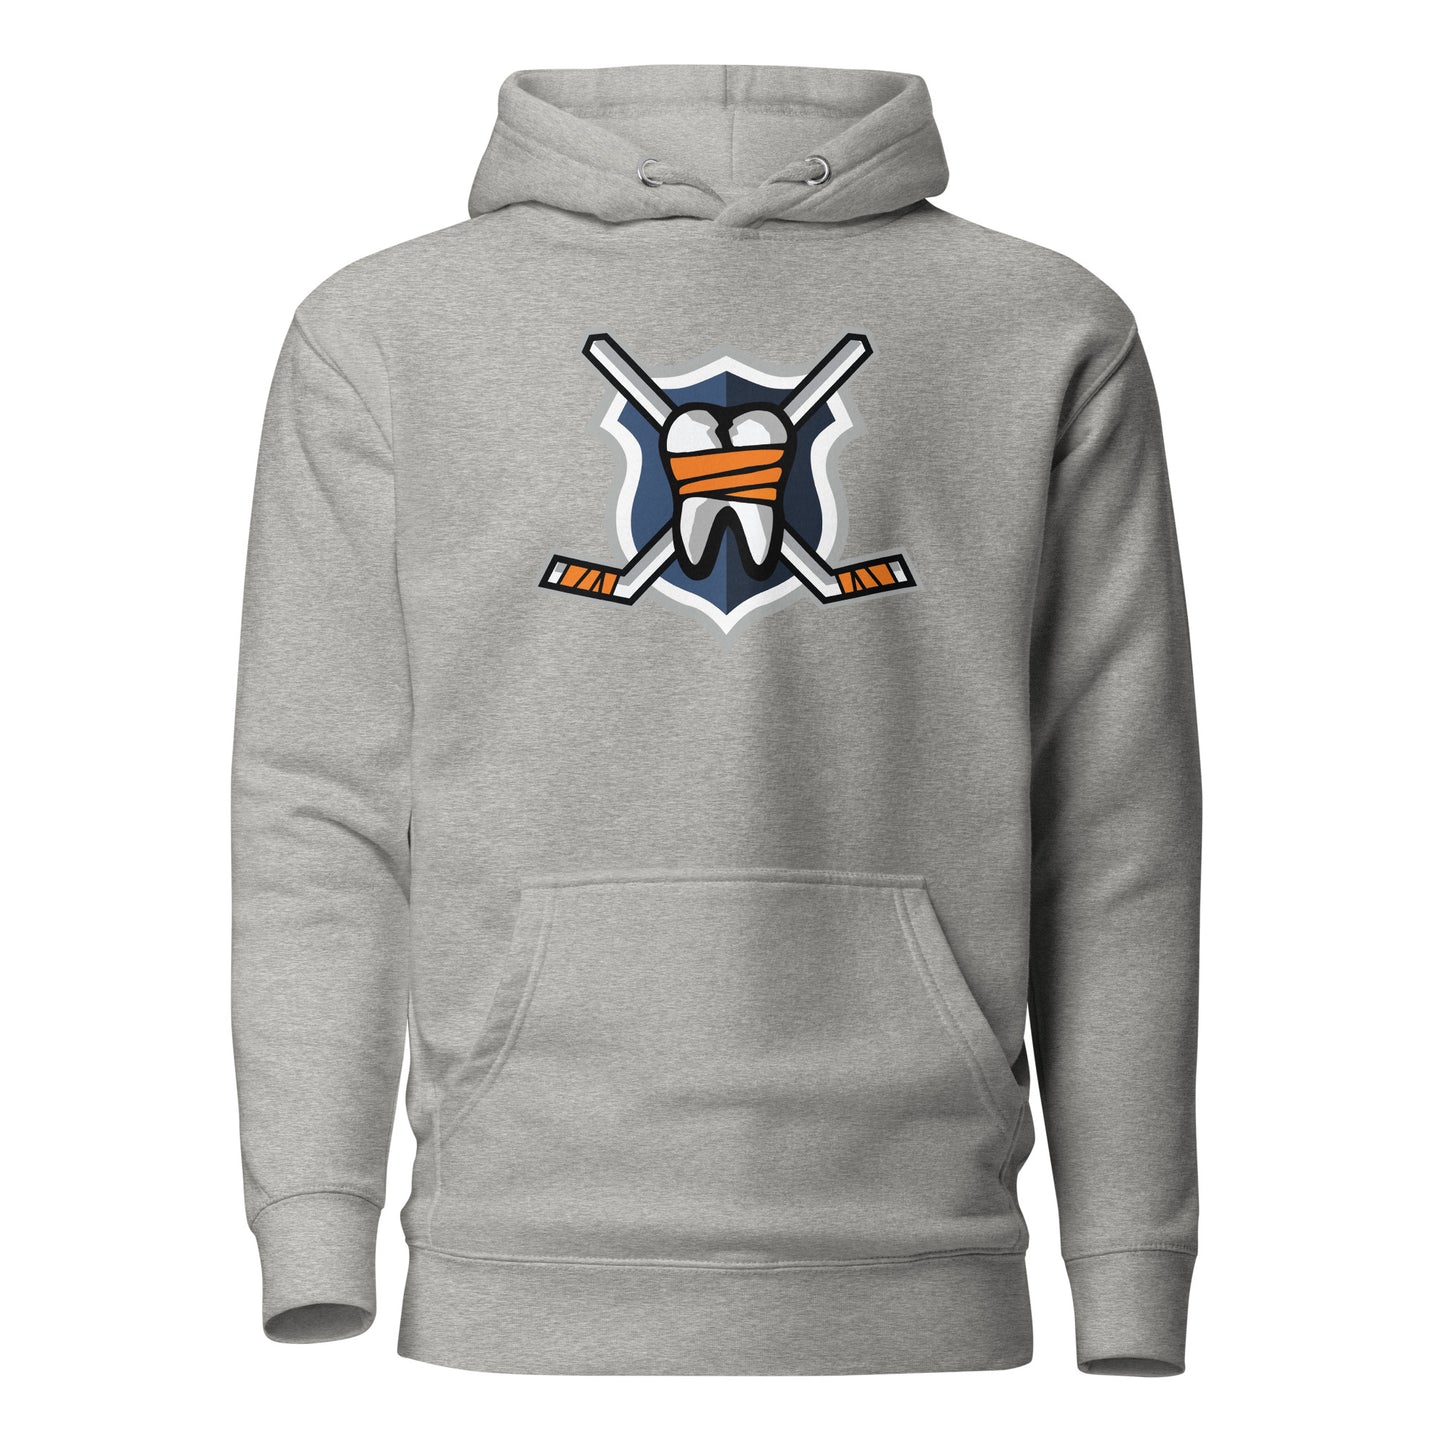 THE CLASSICS - Hockey Fights Full Chest Hoodie